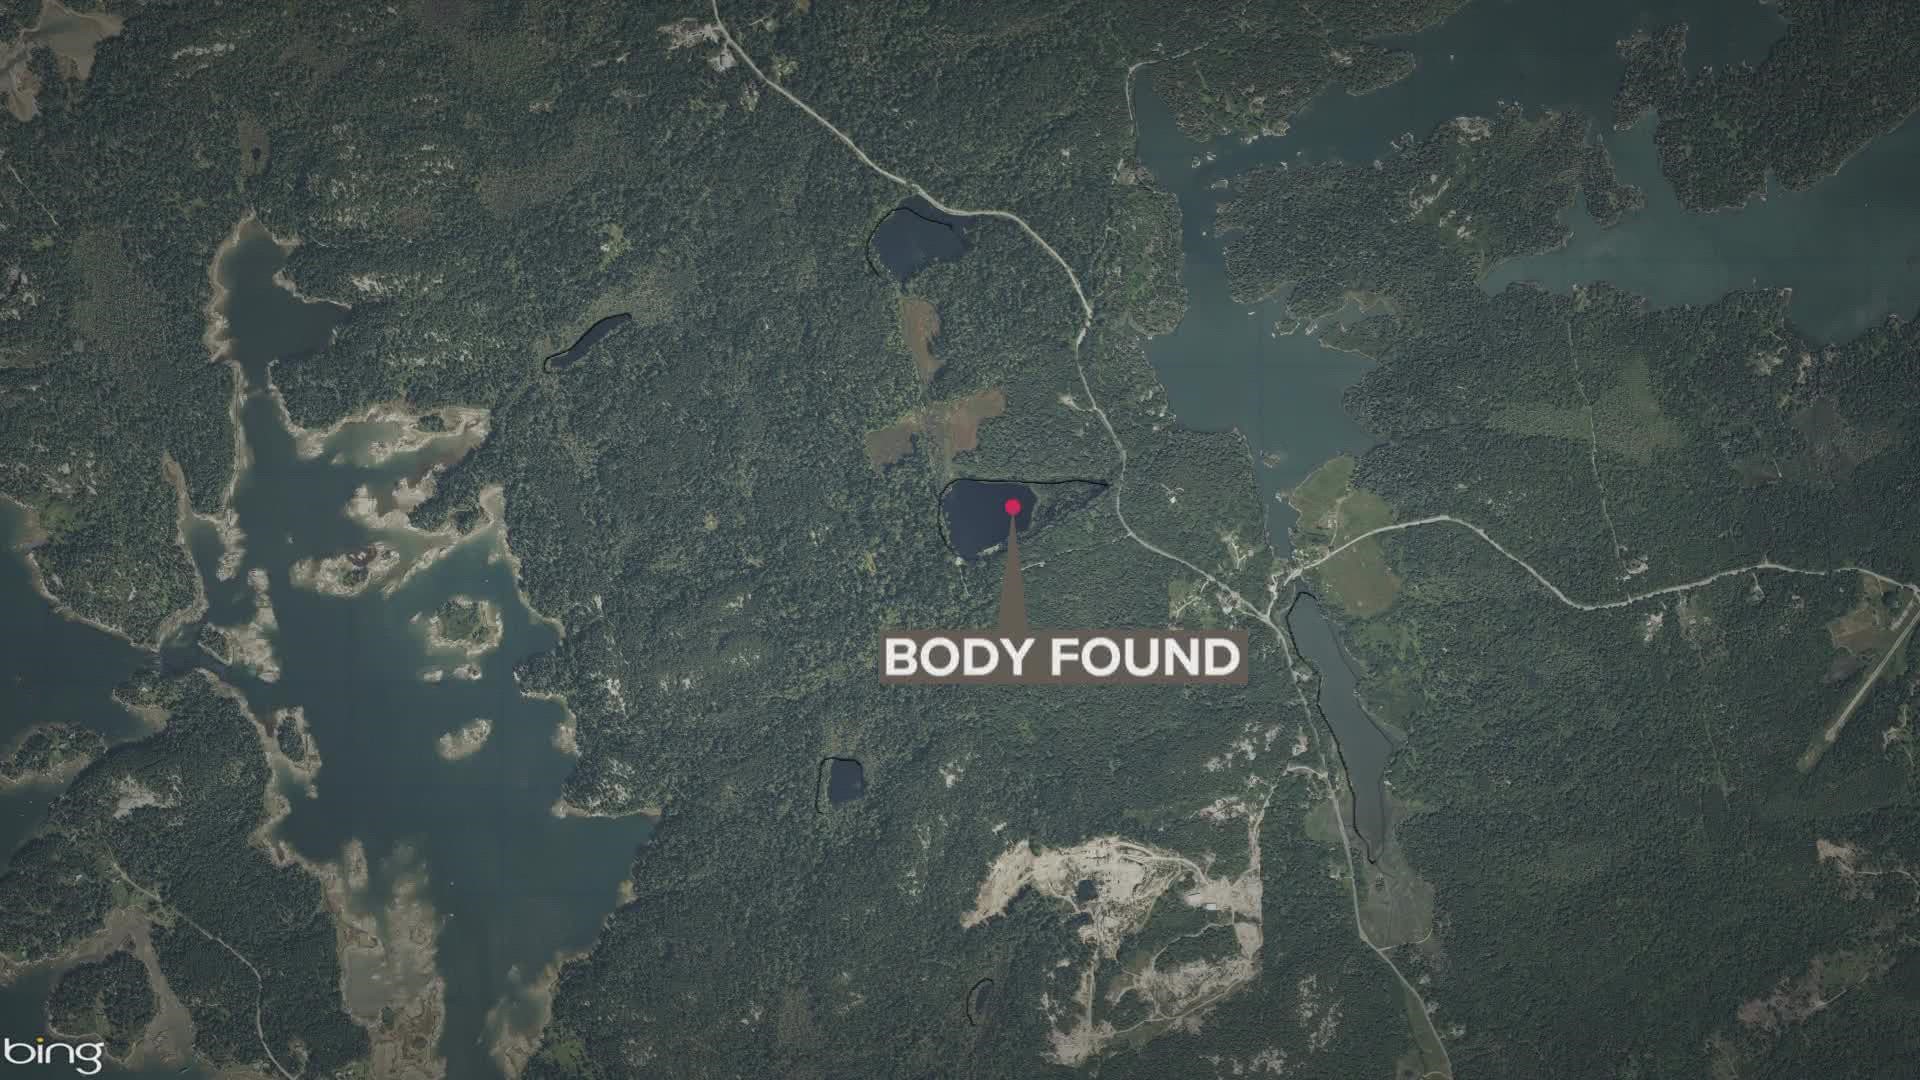 The 31-year-old man's family reported him missing on Monday after they found his ATV near Folly Pond.